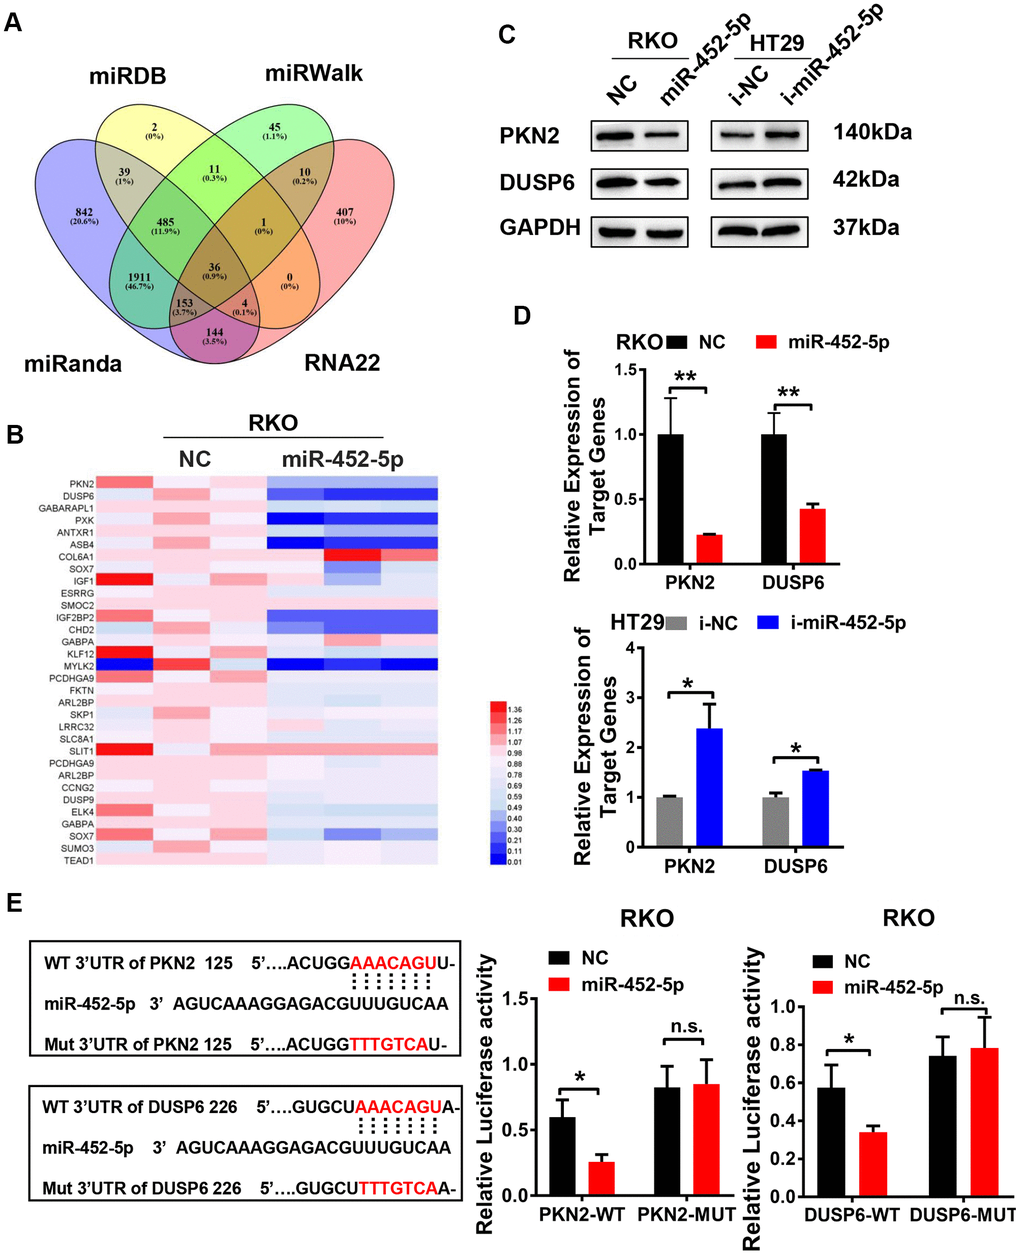 MiR-452-5p directly targets PKN2 and DUSP6. (A) Bioinformatics prediction of potential miR-452-5p target genes by 4 miRNA databases. (B) QRT-PCR results of candidate target genes. (C) The expression of PKN2 and DUSP6 after overexpression and knockdown of miR-452-5p detected by western blotting. (D) The expression of PKN2 and DUSP6 after overexpression and knockdown of miR-452-5p detected by qRT-PCR. (E) Luciferase reporter gene assay: binding sites and mutation sites of PKN2 and DUSP6 were shown on the left, luciferase reporter gene results were shown on the right. *p 